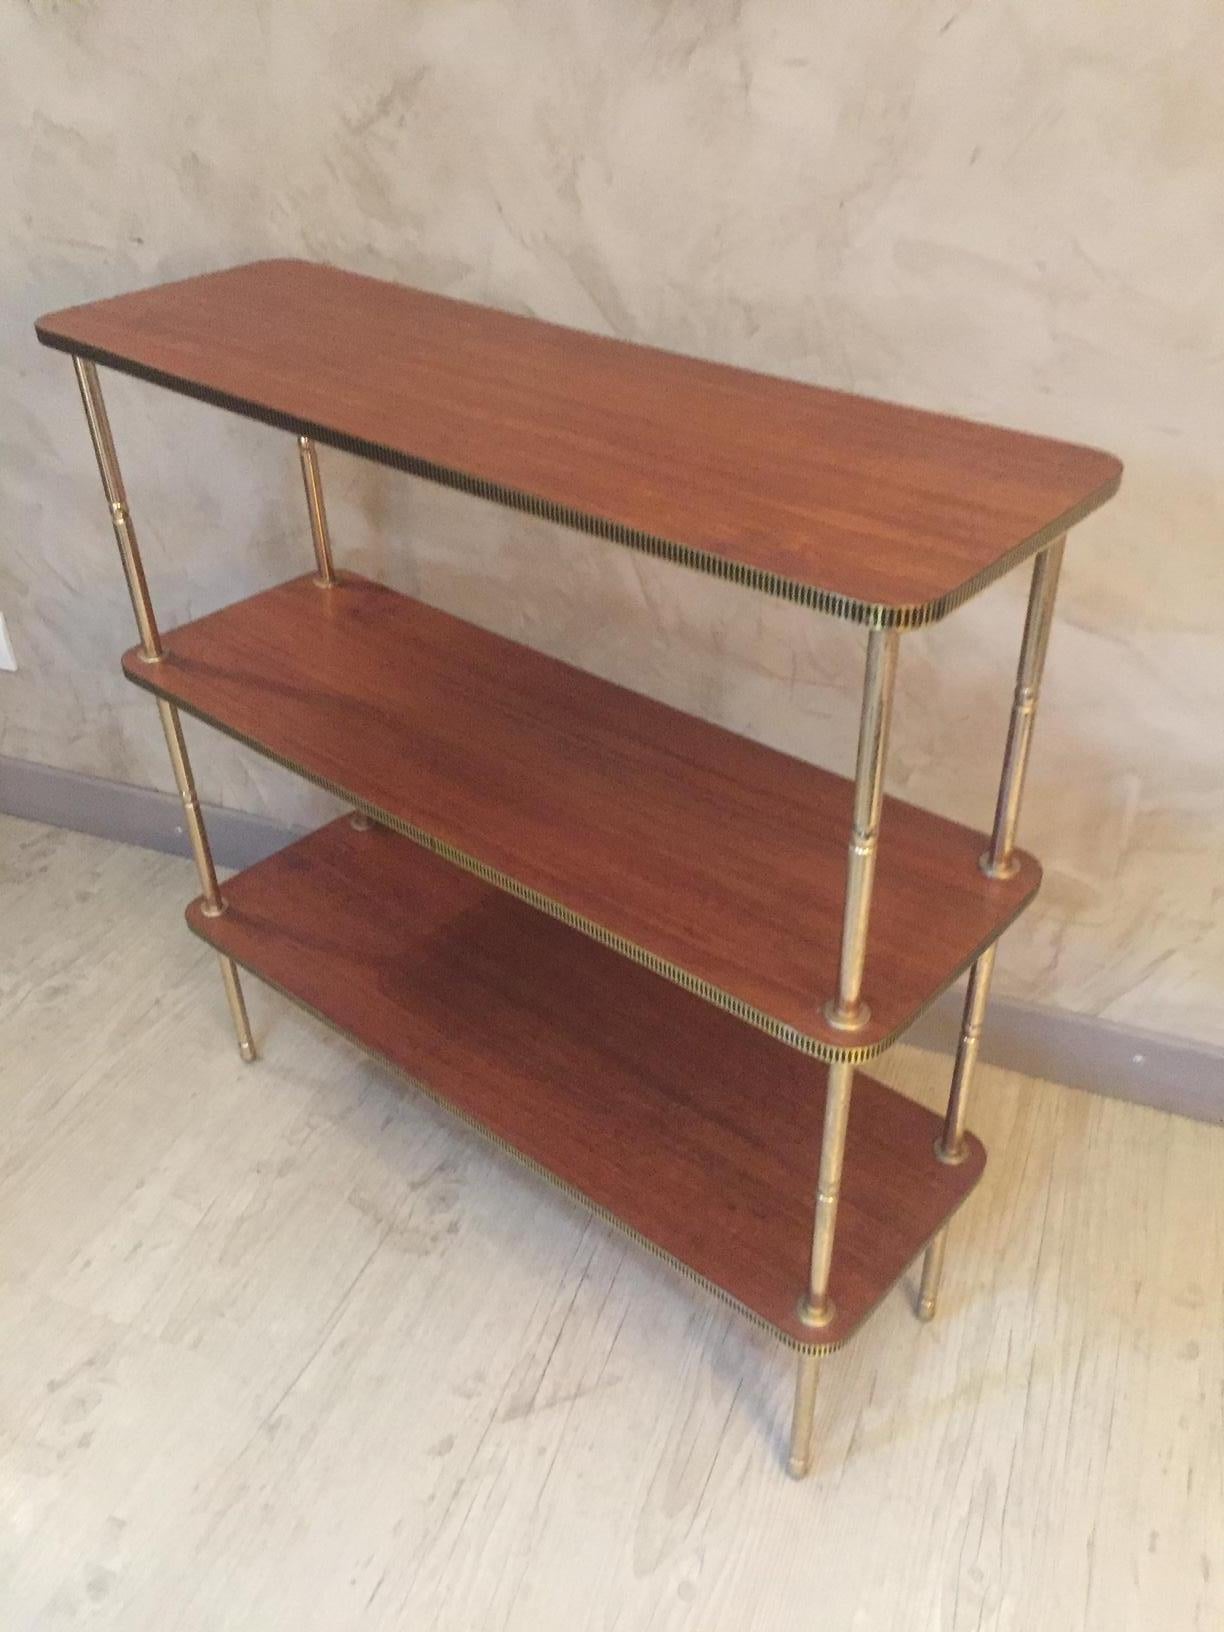 20th century gilded brass and rosewood low shelf unit from the 1950s.
Gilded brass sides and base. Good quality.
 